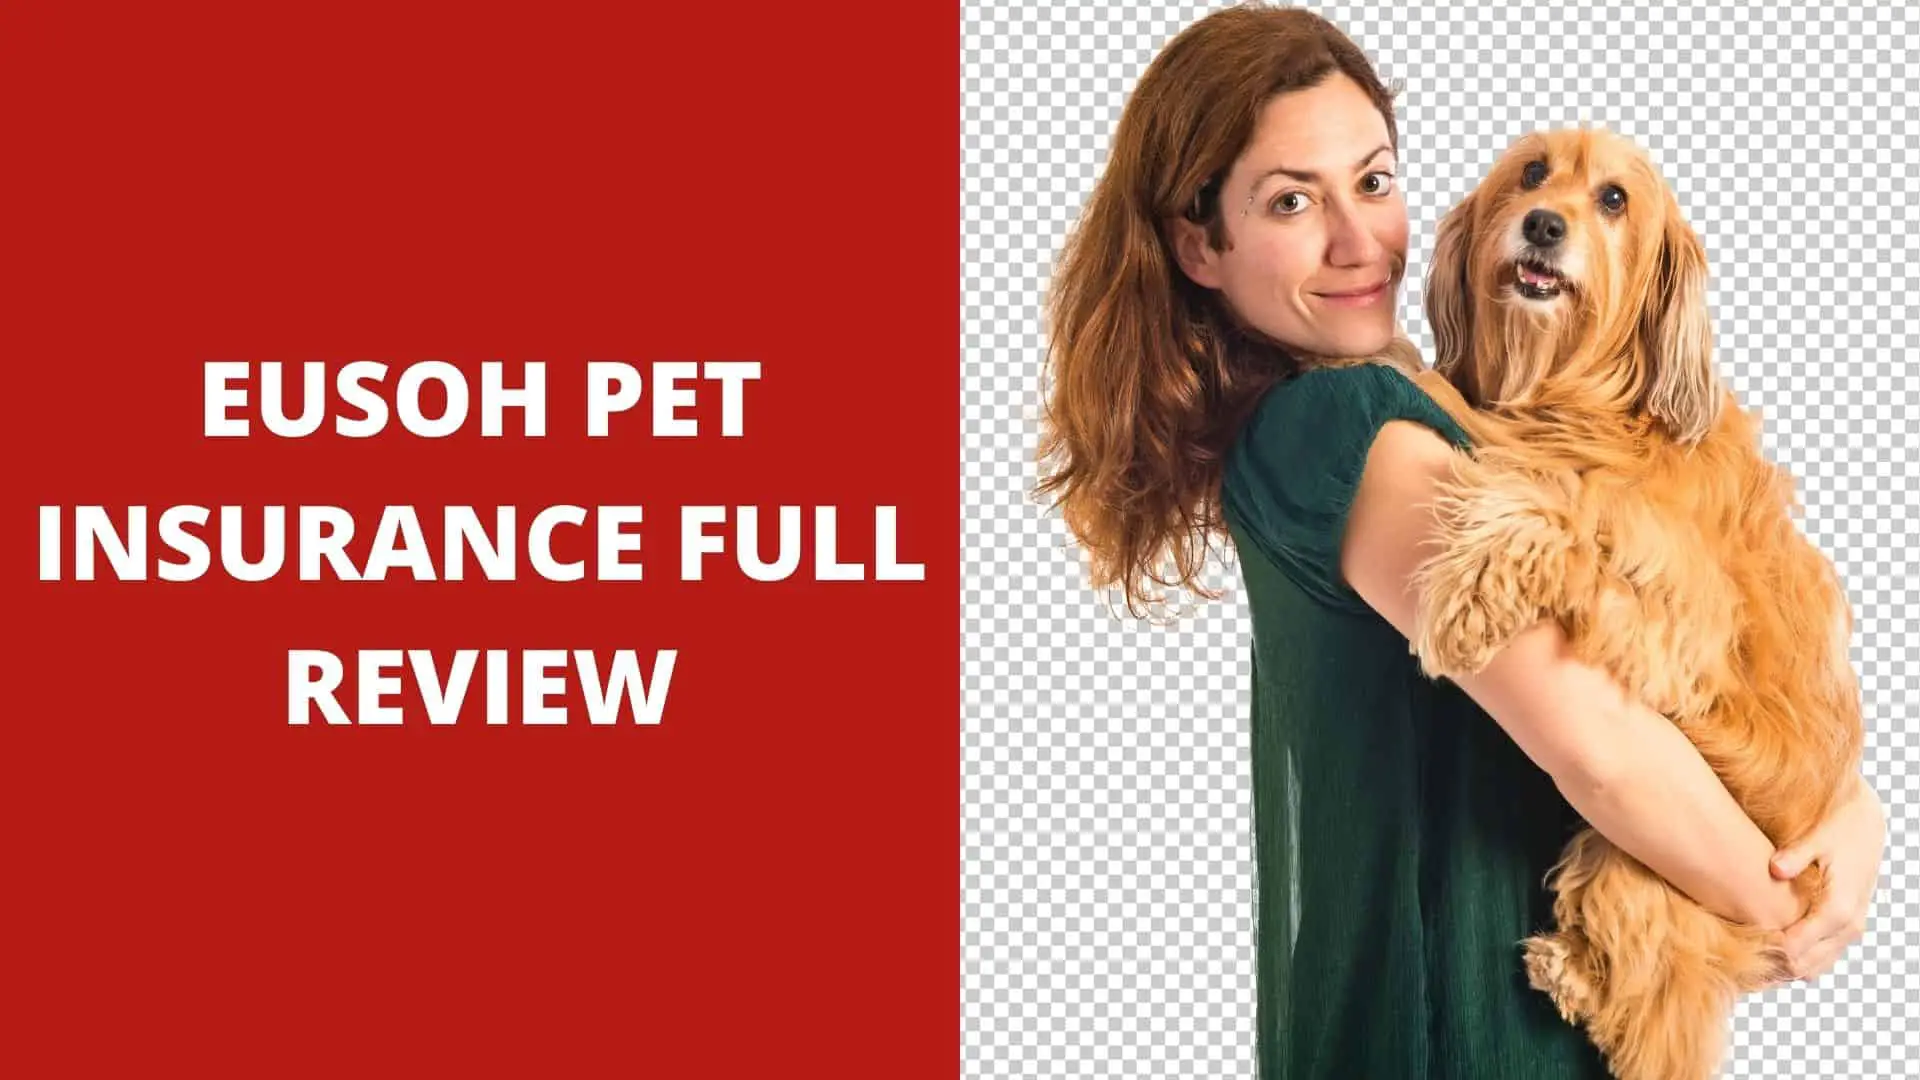 Eusoh Pet Insurance Full Review 2022 – Is It Right Choice?